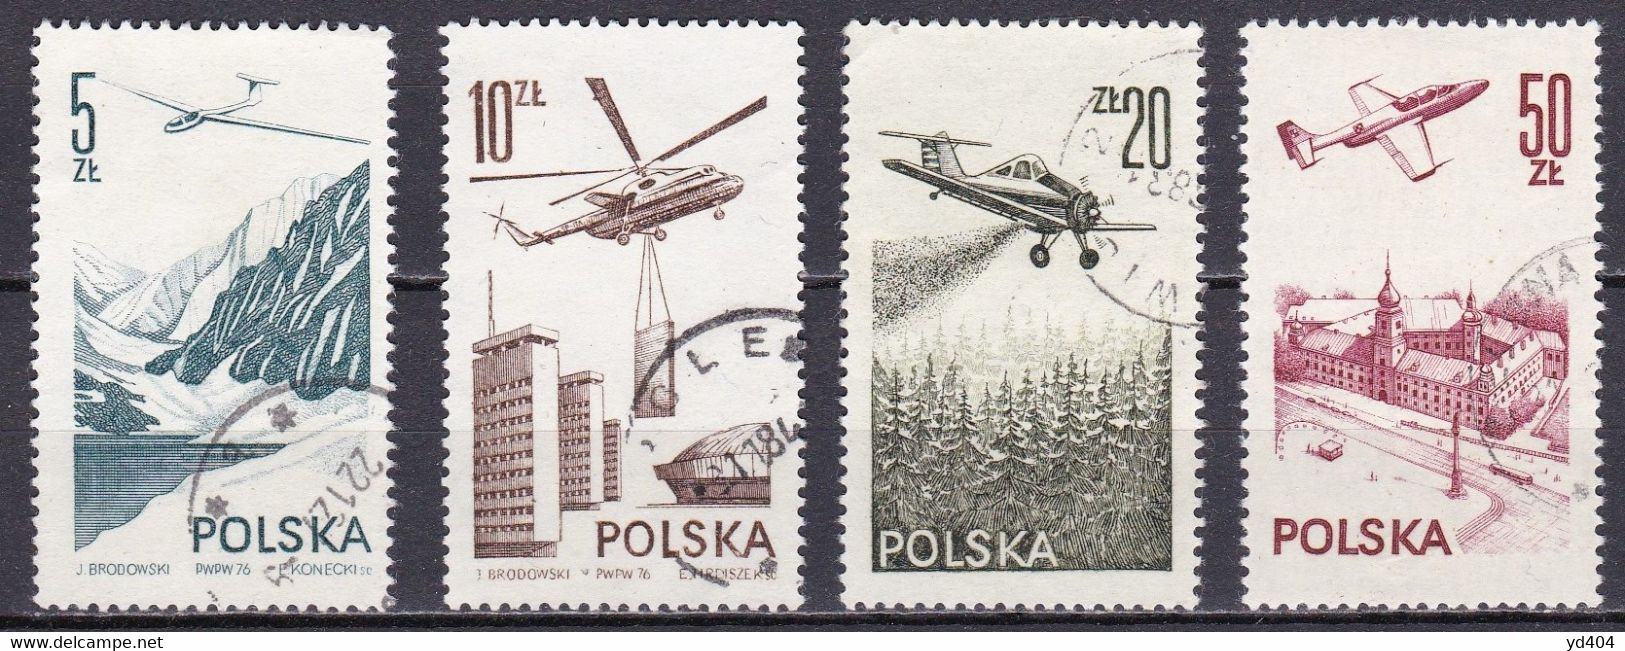 PL309 – POLAND – AIRMAIL – 1976-78 – CONTEMPORARY AVIATION - Y&T # 55/8 USED 3,30 € - Gebraucht